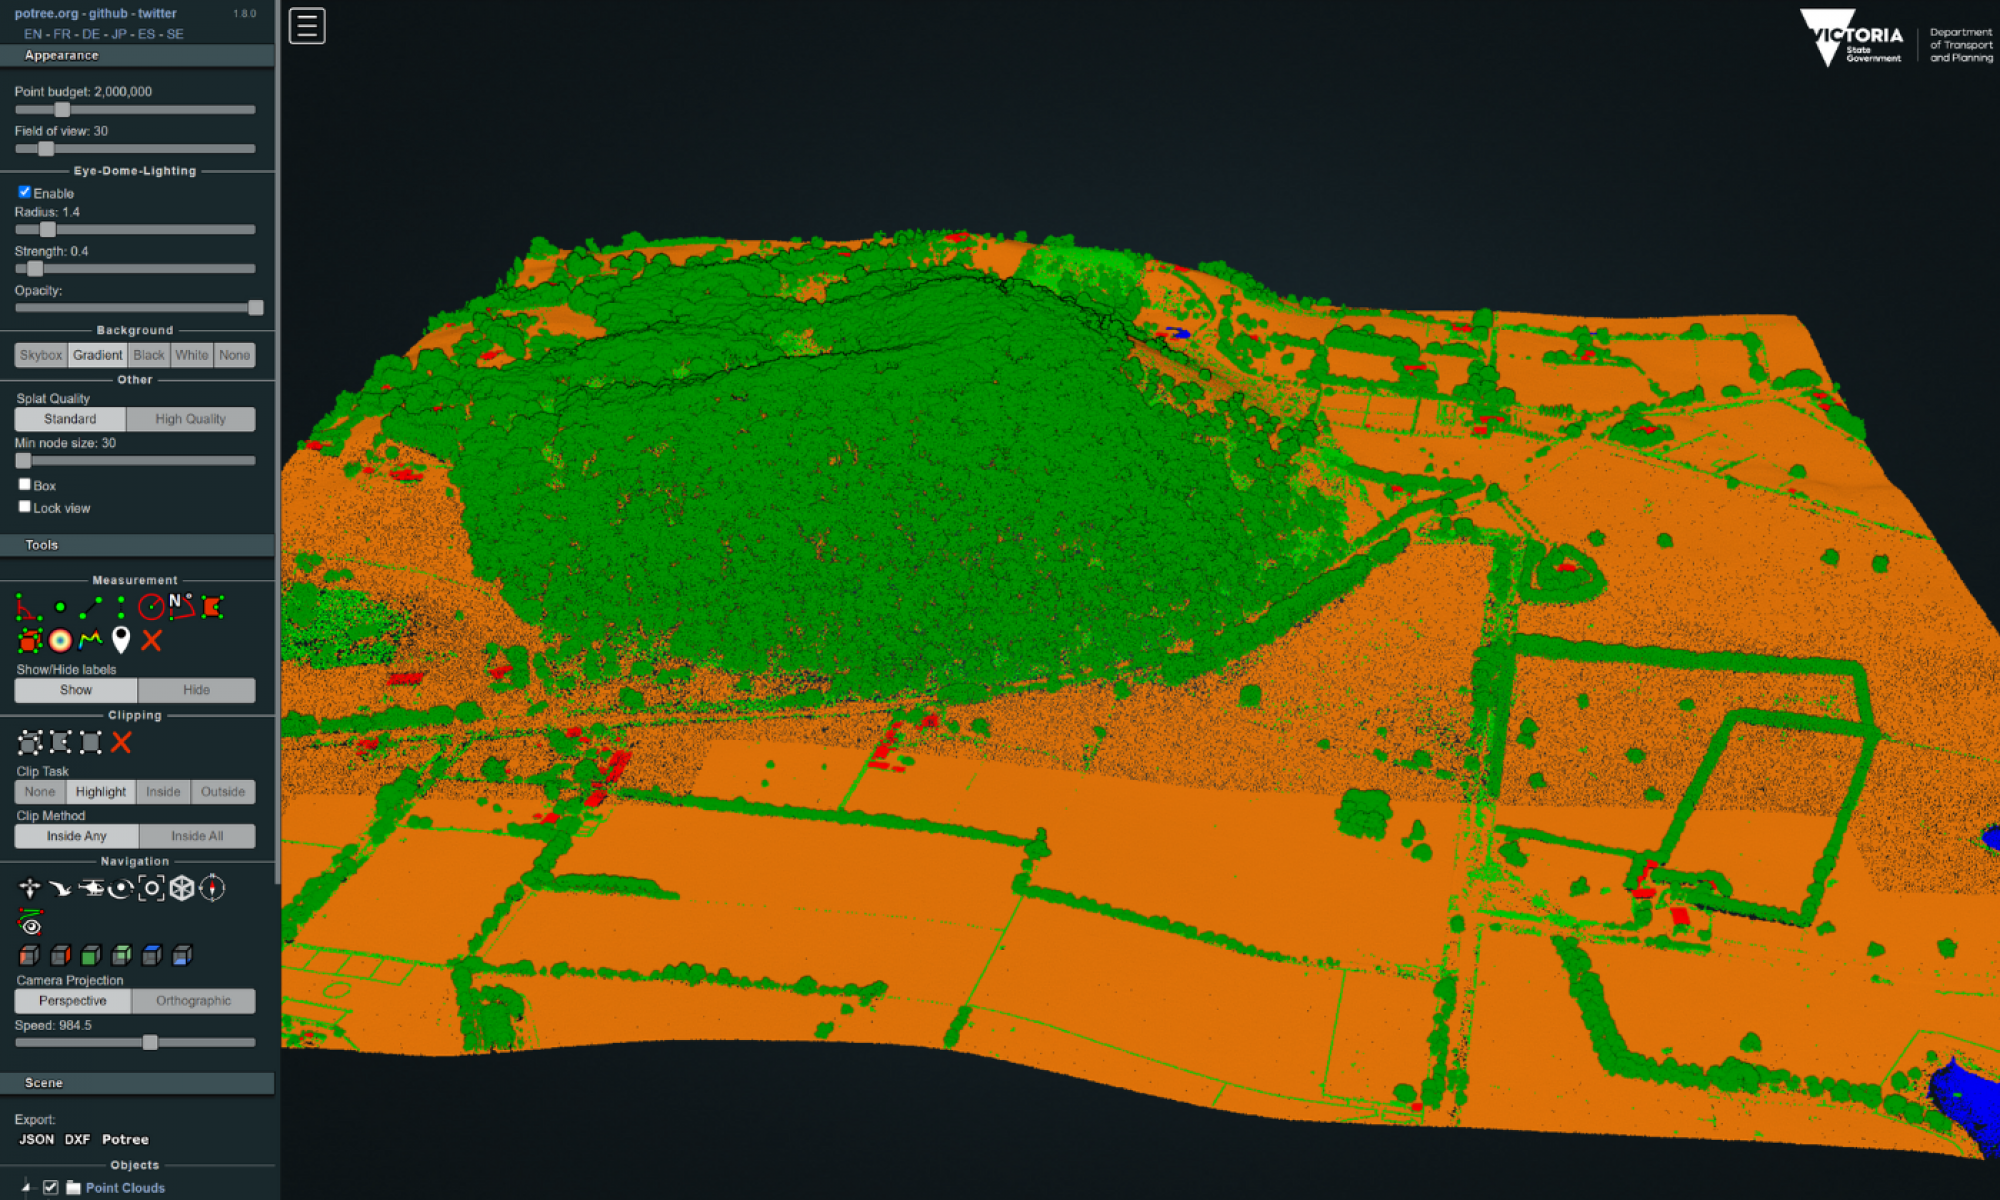 A screen capture of the web browser preview of Axedale-Moe and Golden Plains LiDAR data. A menu on the left hand side shows options to customise the data. The main screen shows terrain in shades of orange, vegetation in green, water in blue and buildings in red.